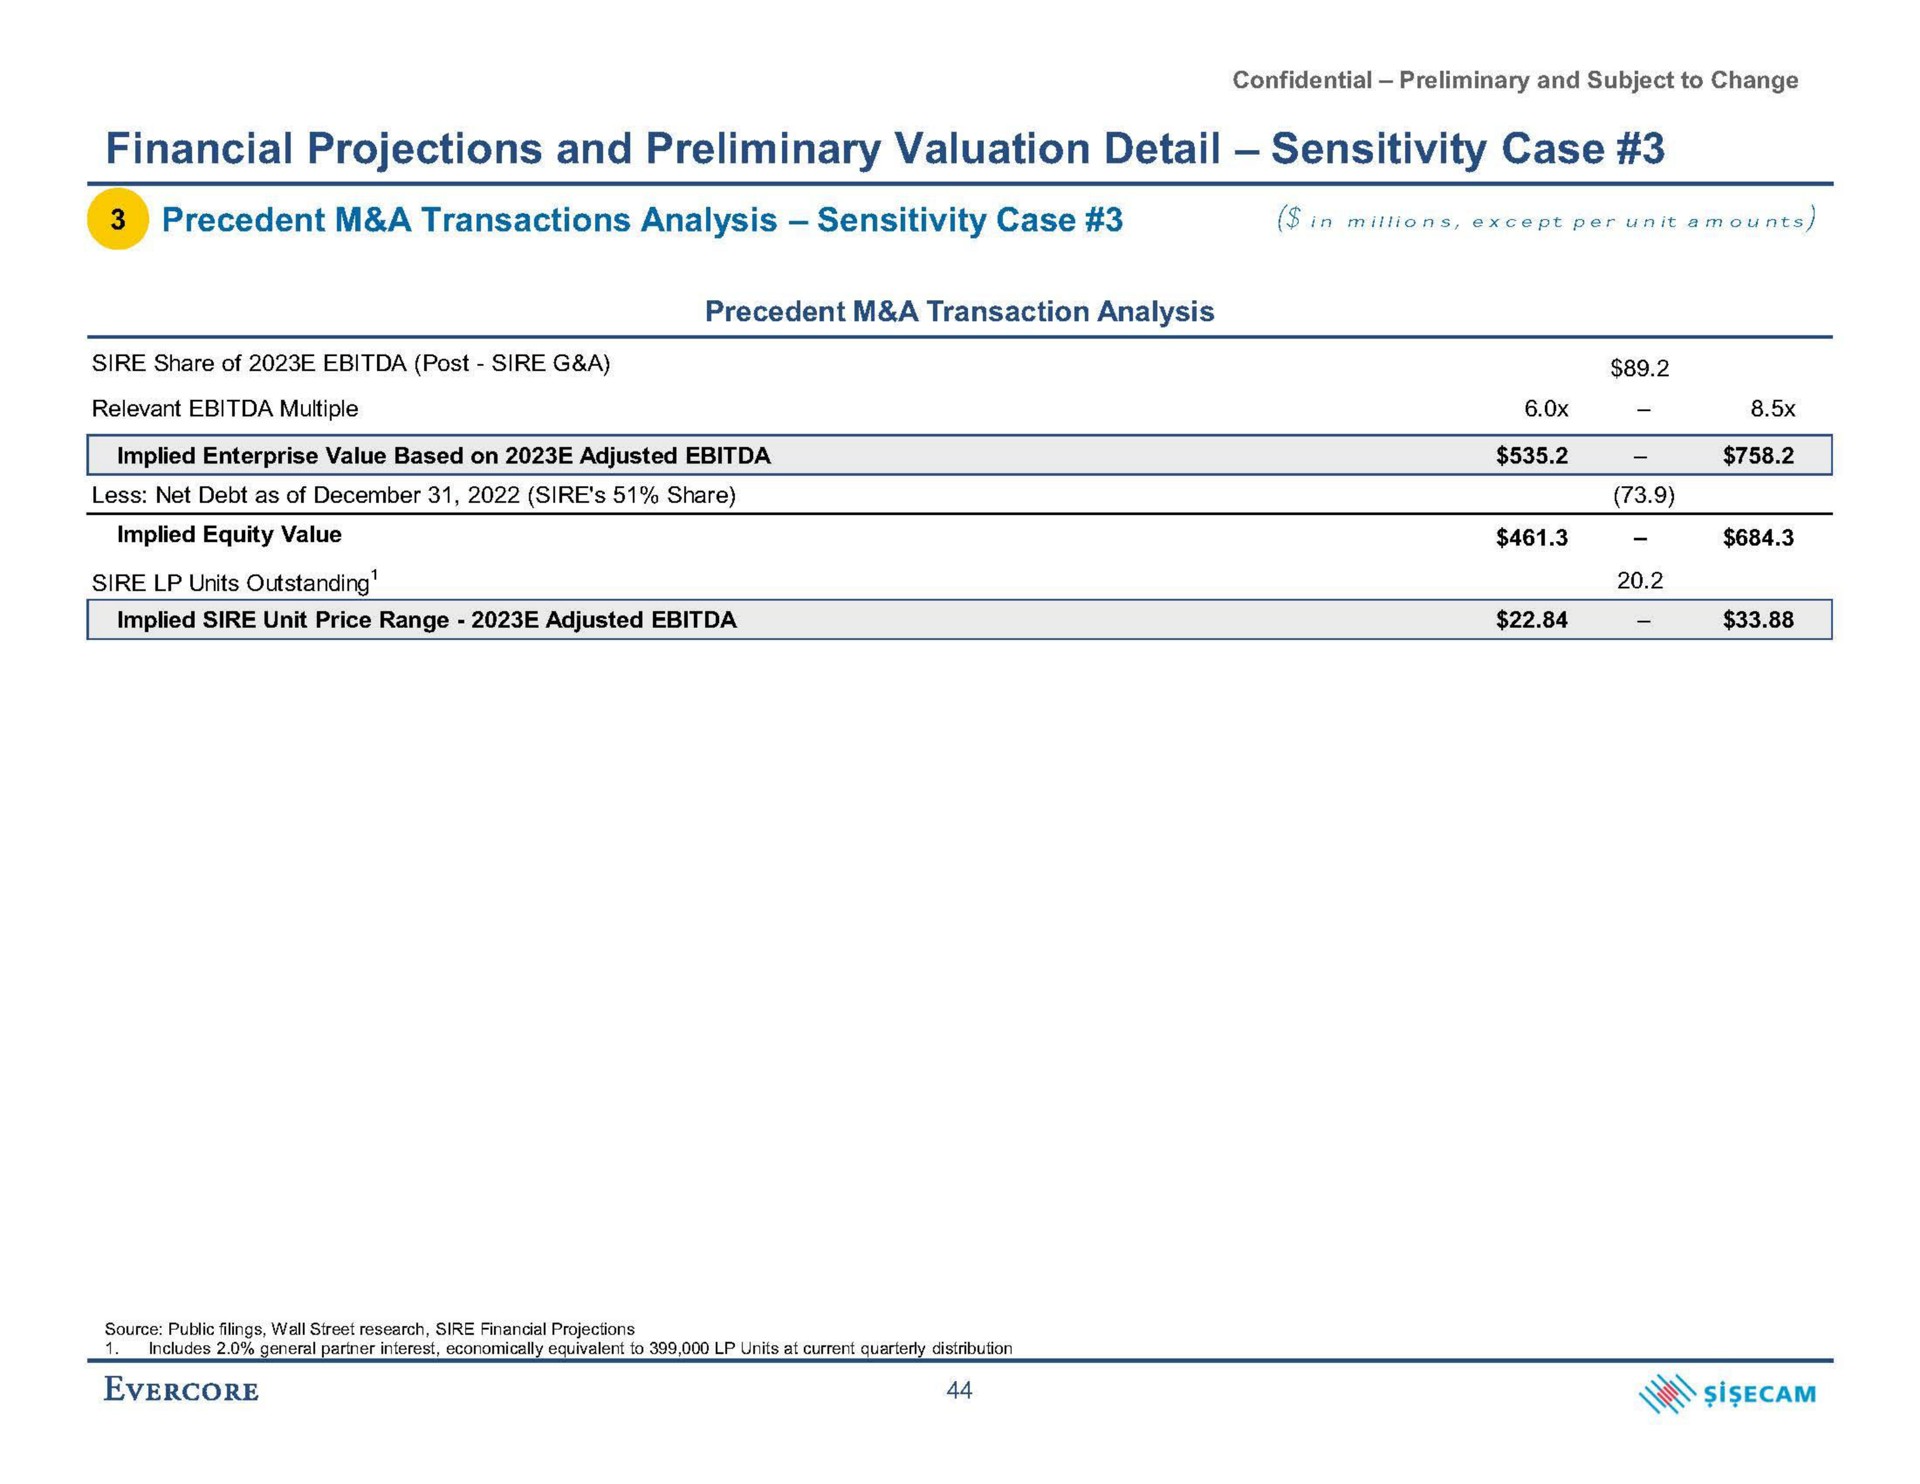 financial projections and preliminary valuation detail sensitivity case precedent a transactions analysis sensitivity case in except per unit amounts a | Evercore